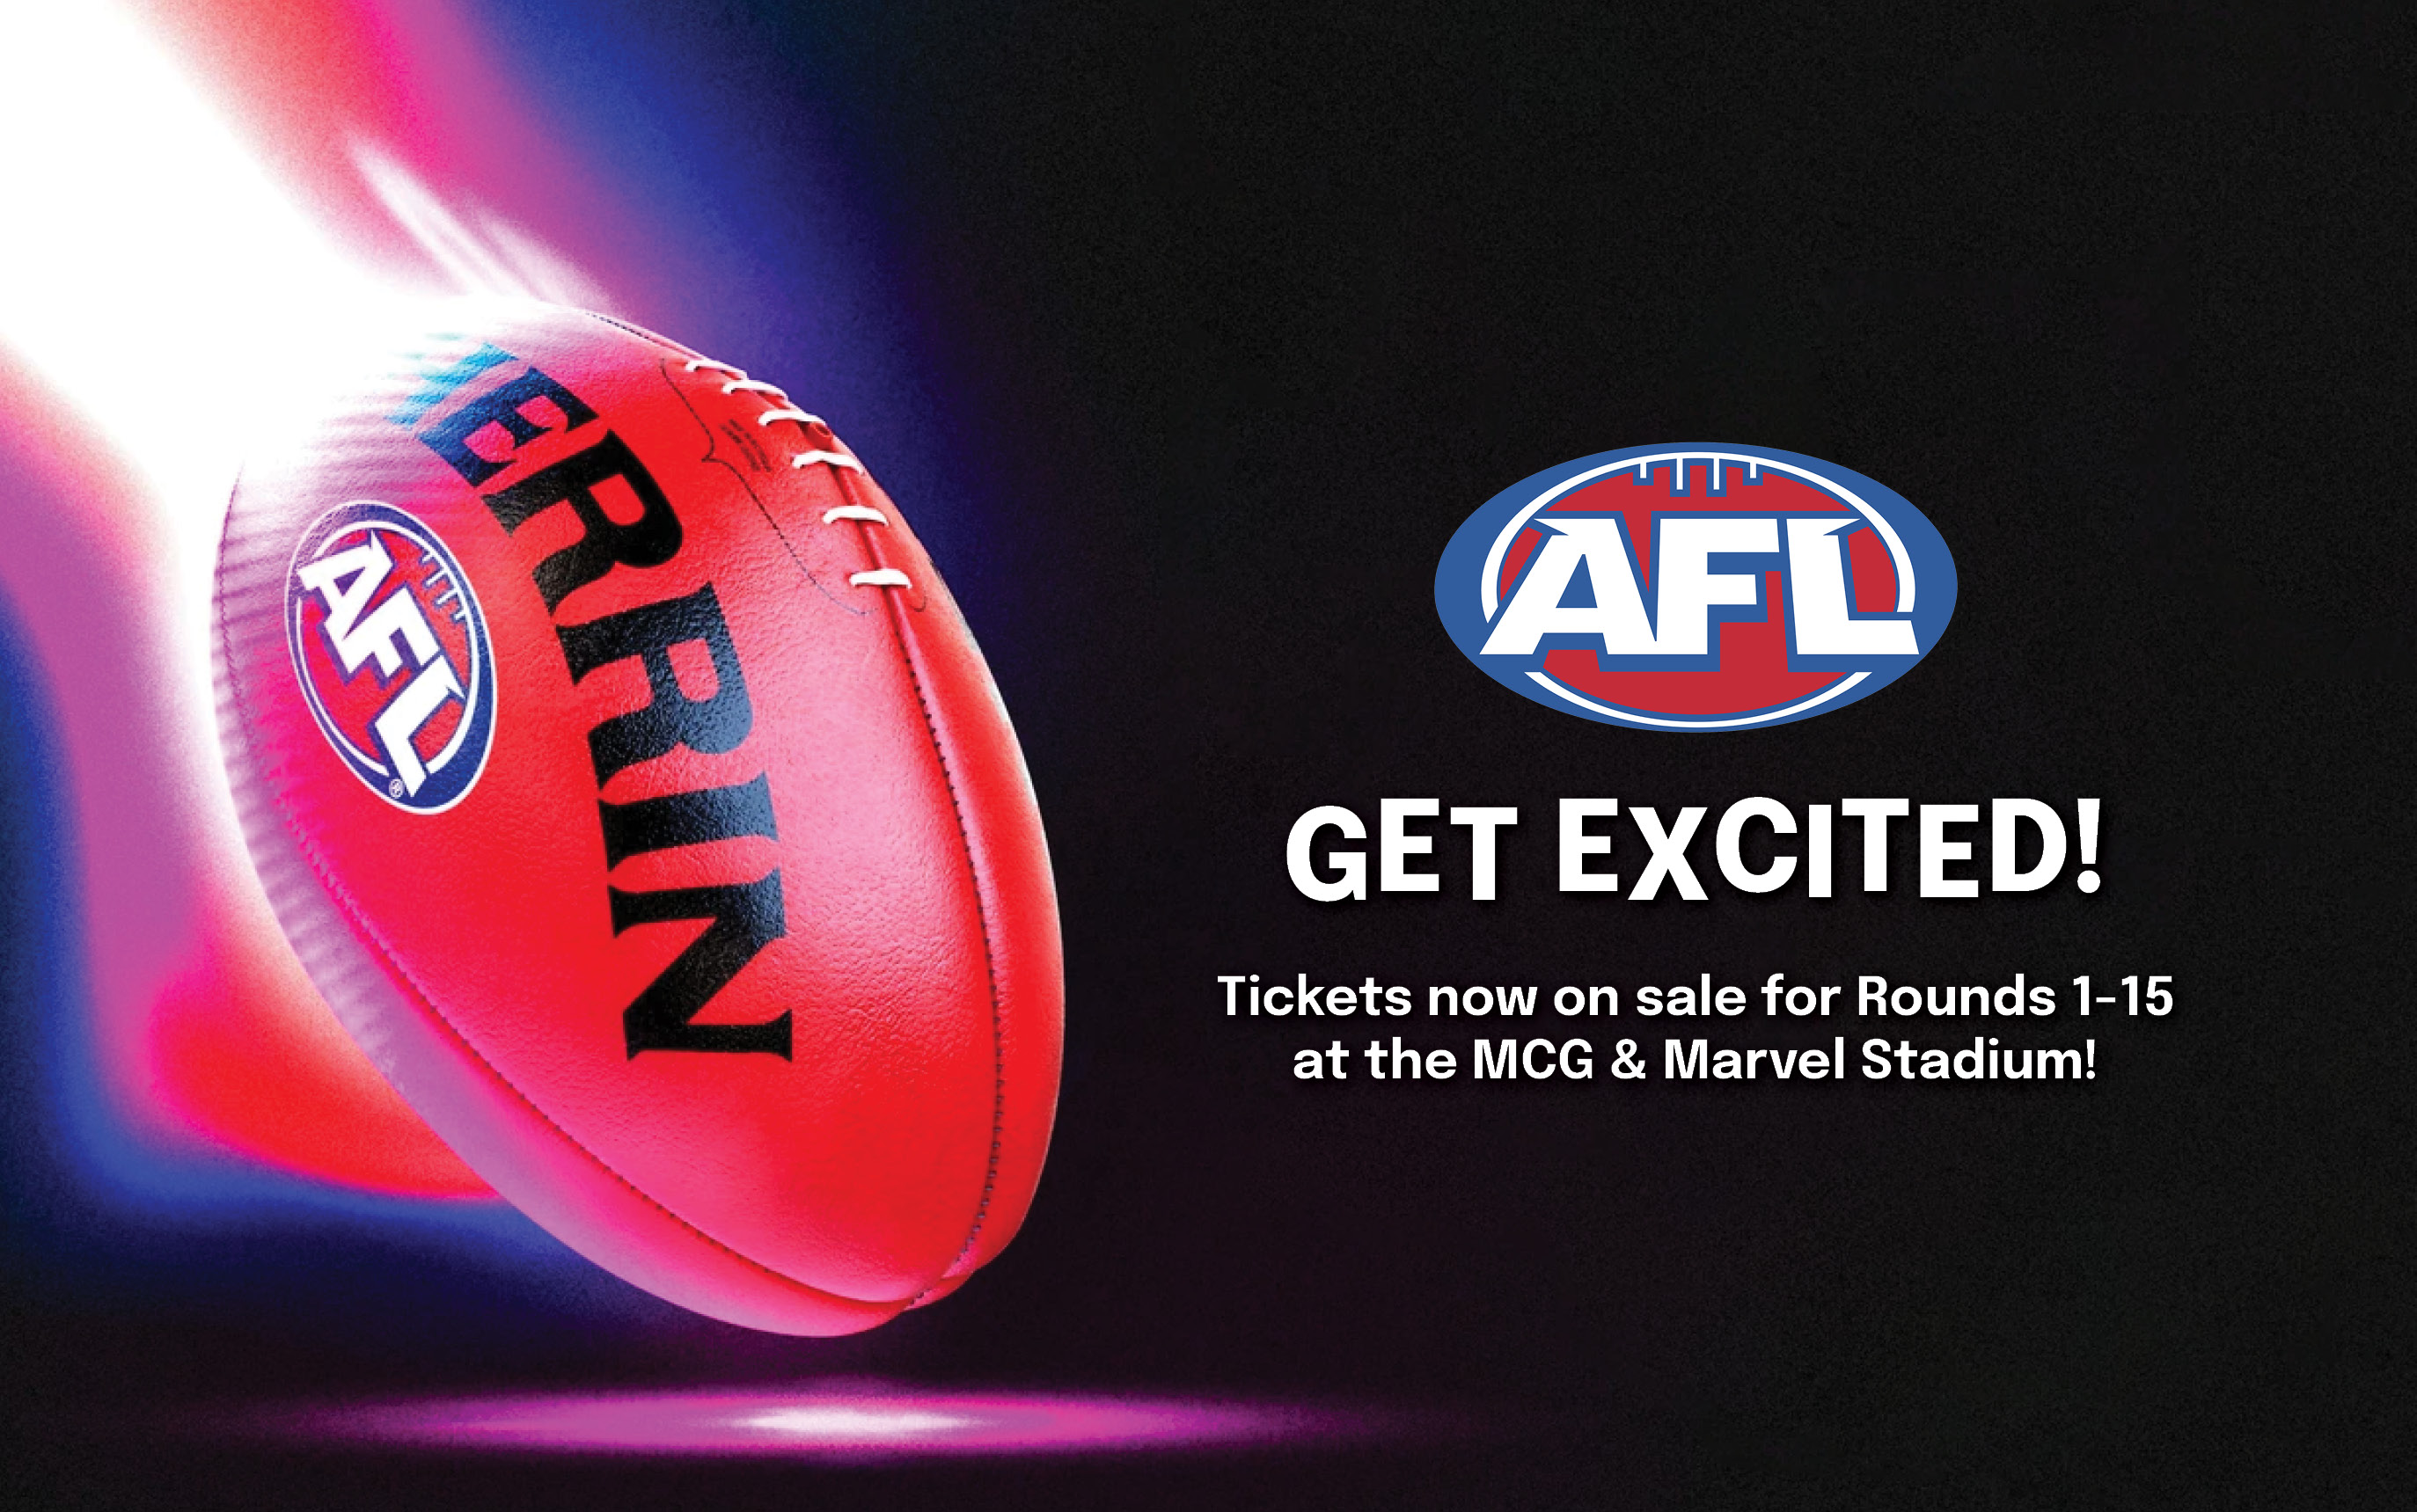 AFL TICKETS NOW ON SALE!